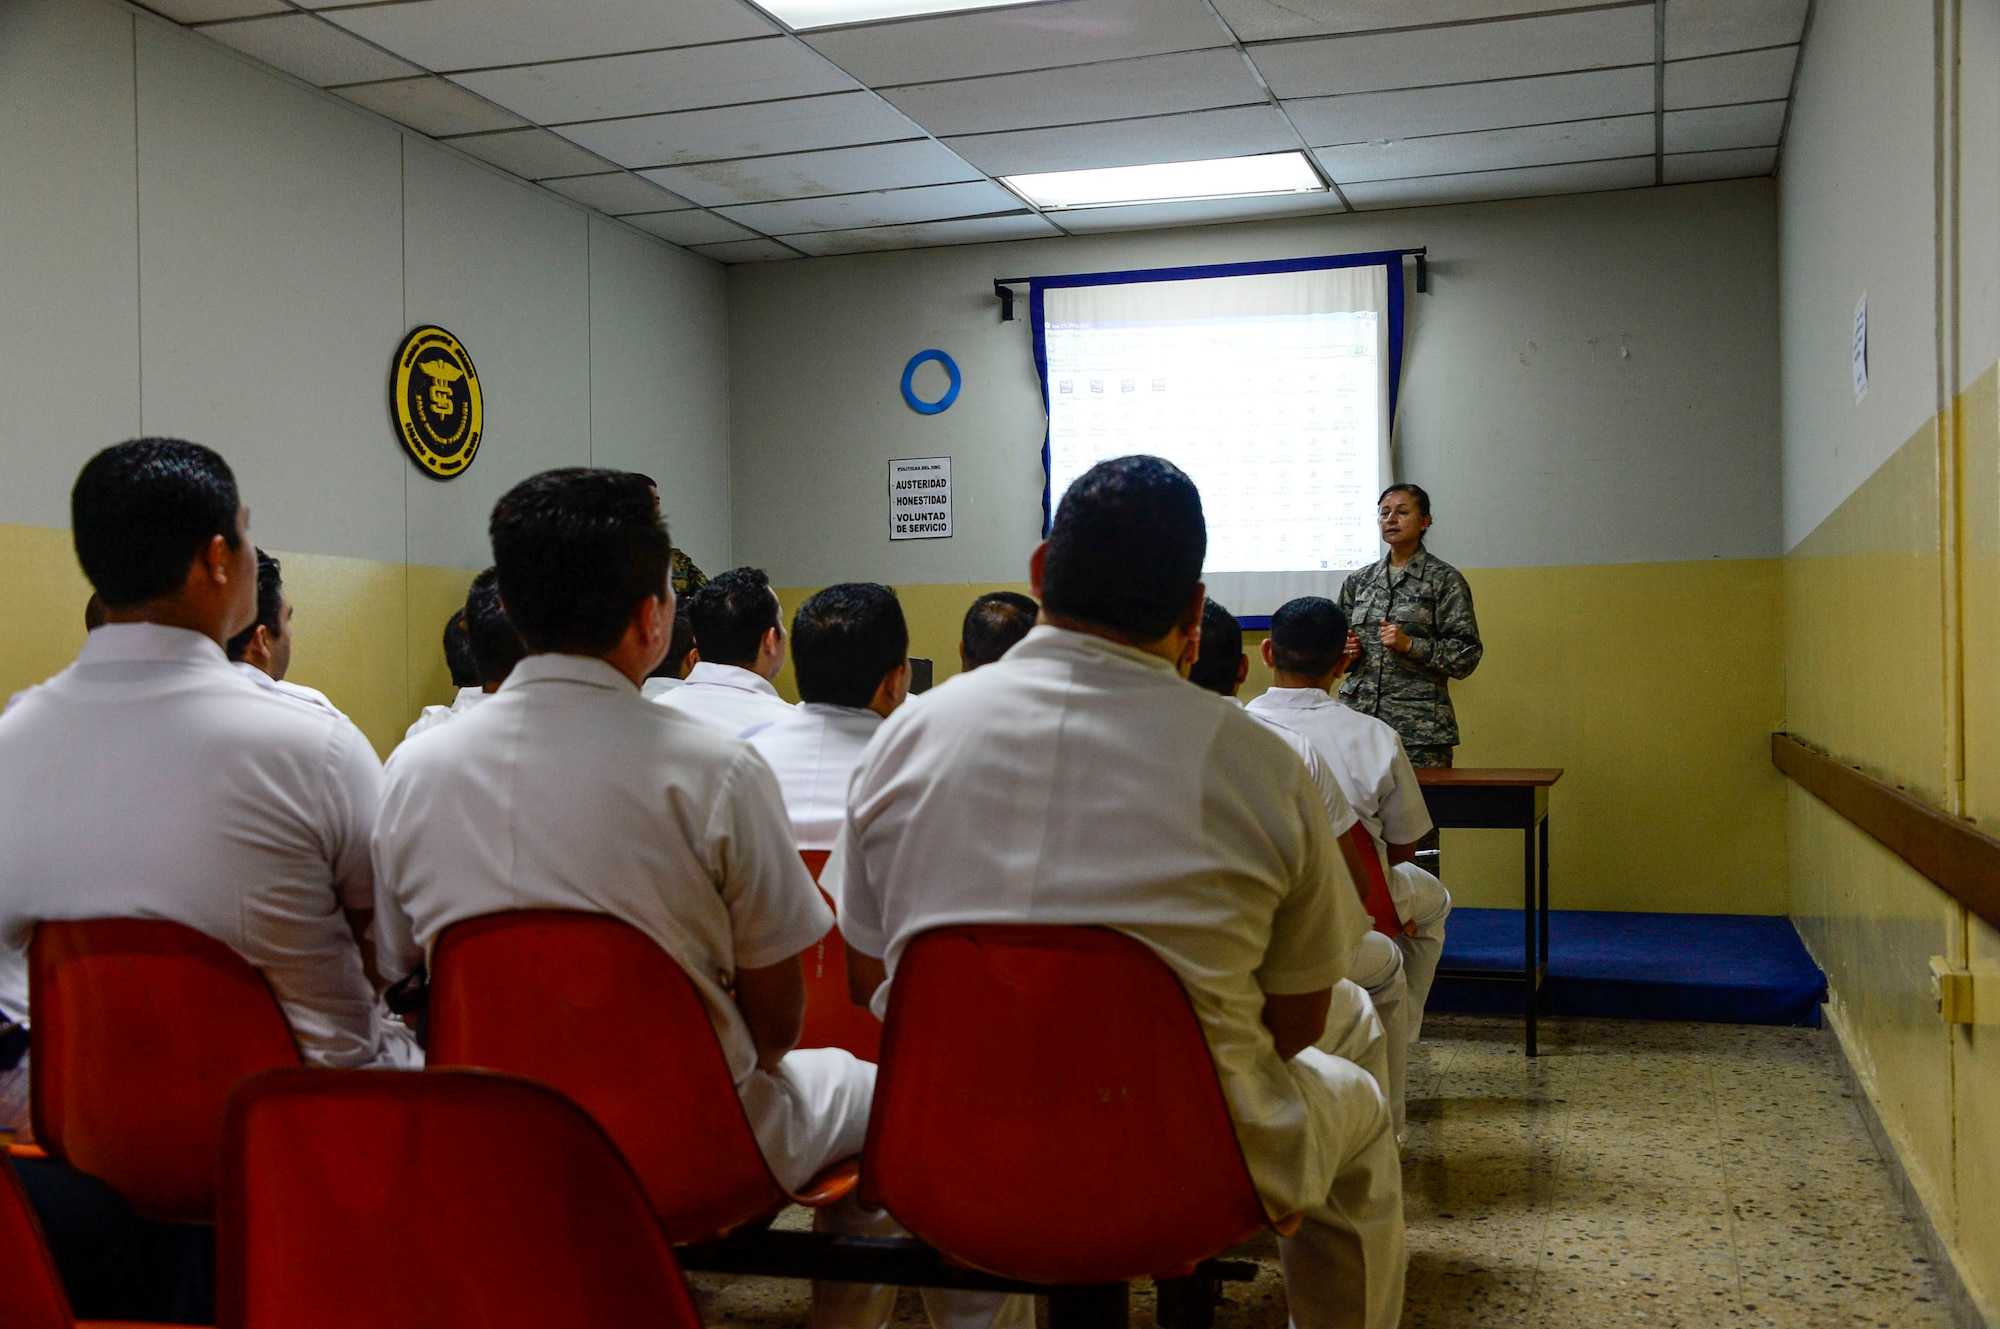 U.S. Air Force Maj. Helda Carey, 12th Air Force (Air Forces Southern) international health specialist, briefs medical technicians in training at Hospital Militar de El Salvador on first responder procedures during a medical subject matter expert exchange in San Salvador, El Salvador, March 11, 2016. Earlier in the week, Carey led a team of Air Force medical professionals in a week-long exchange with Salvadoran medics at Ilopango Air Base.  After the subject matter expert exchange was completed, the team was invited to a share their expertise with members of the Hospital Militar de El Salvador.  (U.S. Air Force photo by Tech. Sgt. Heather R. Redman/Released)